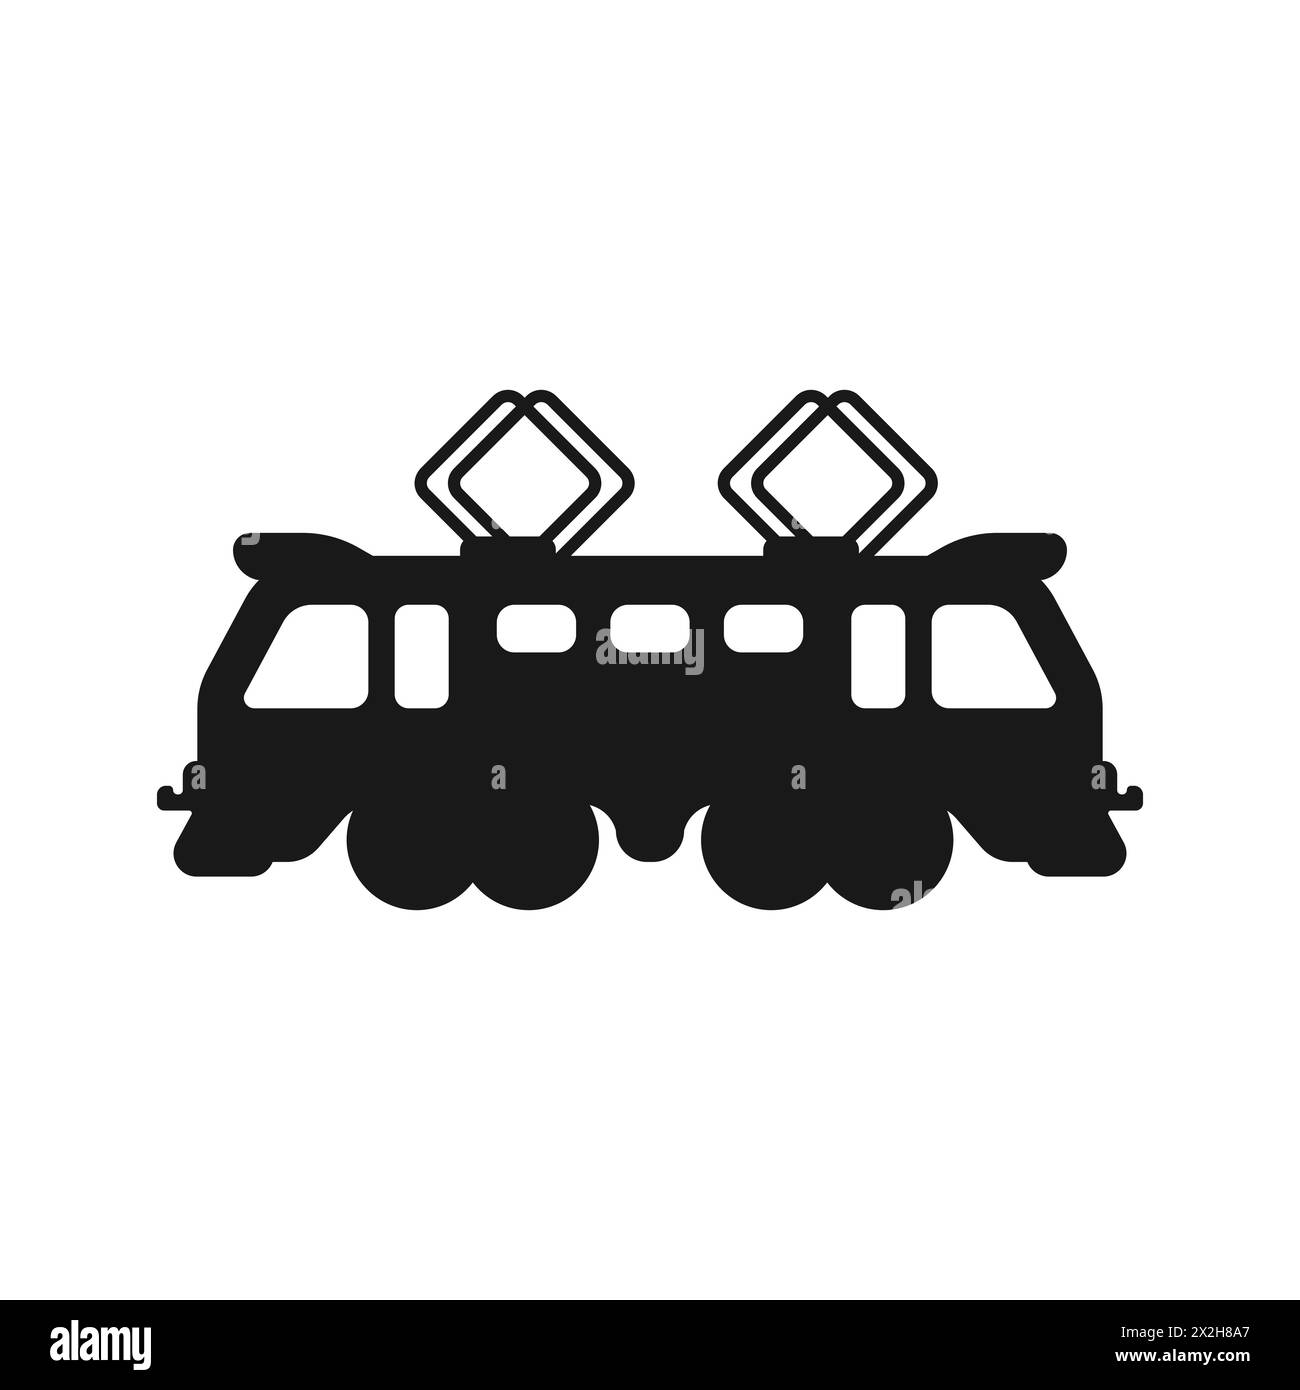 Cargo train logo. Silhouette of a vintage locomotive vector. Railroad vector icon. Cabin of the train with trailers icons. Vector illustration. Stock Vector